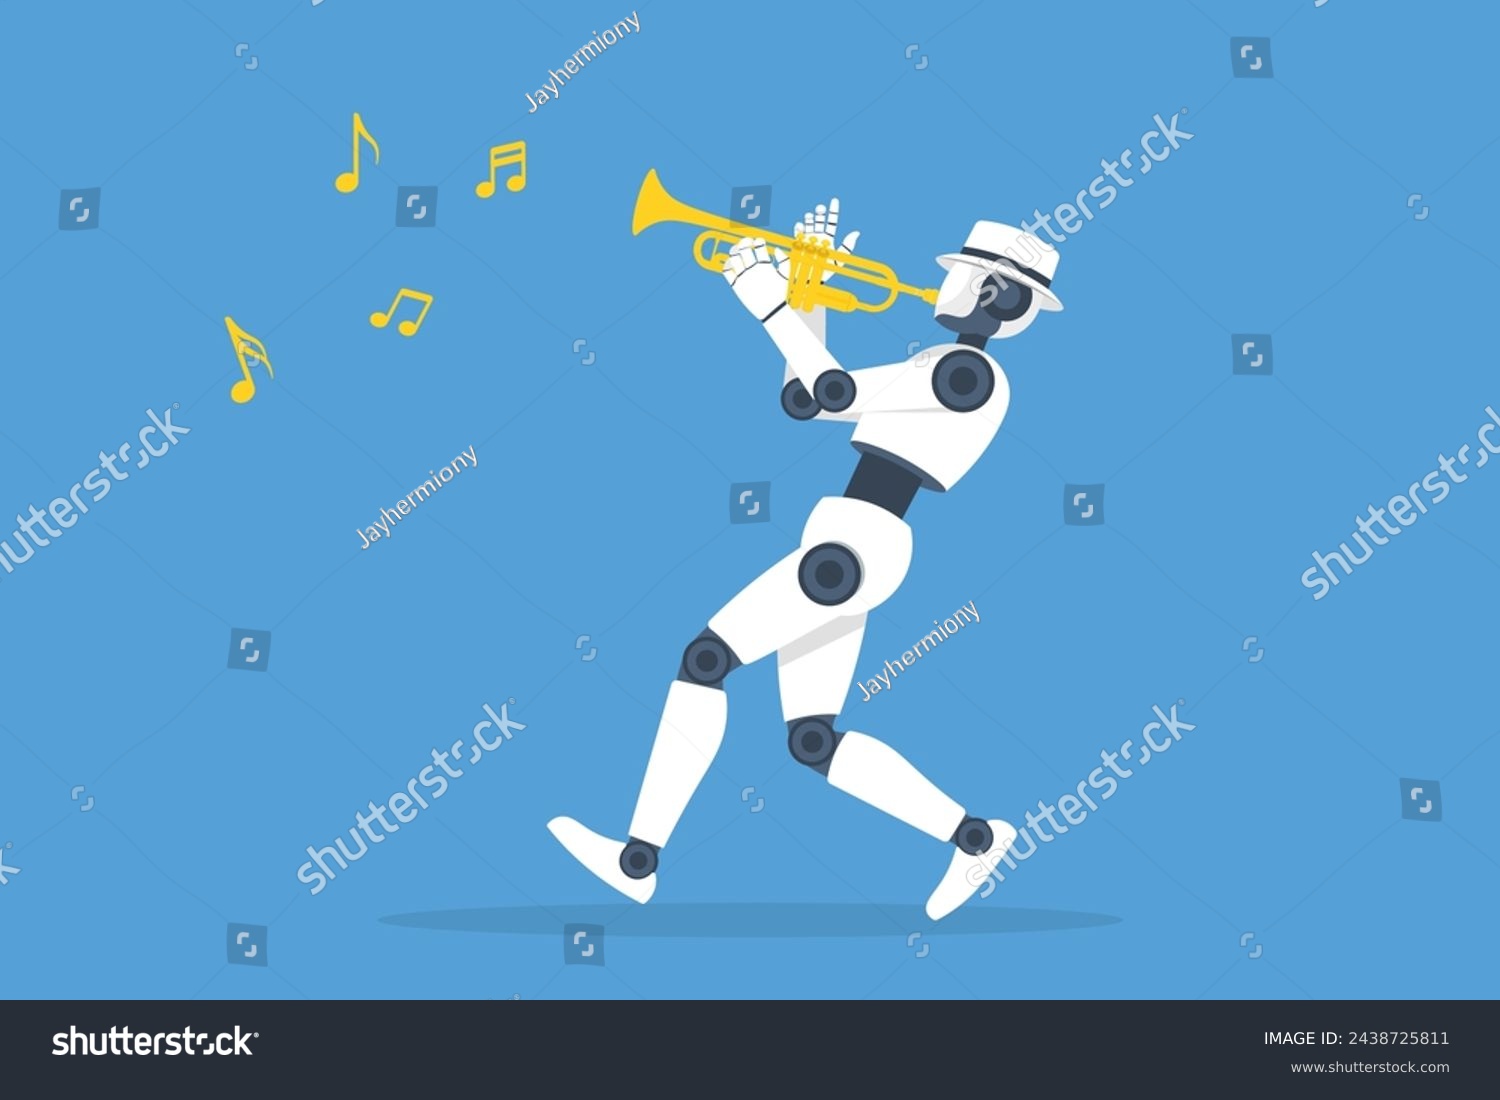 SVG of A robot is playing a trumpet and the notes are floating in the air, Concept of using artificial intelligence AI technology to create music, compose music, and create sound. svg